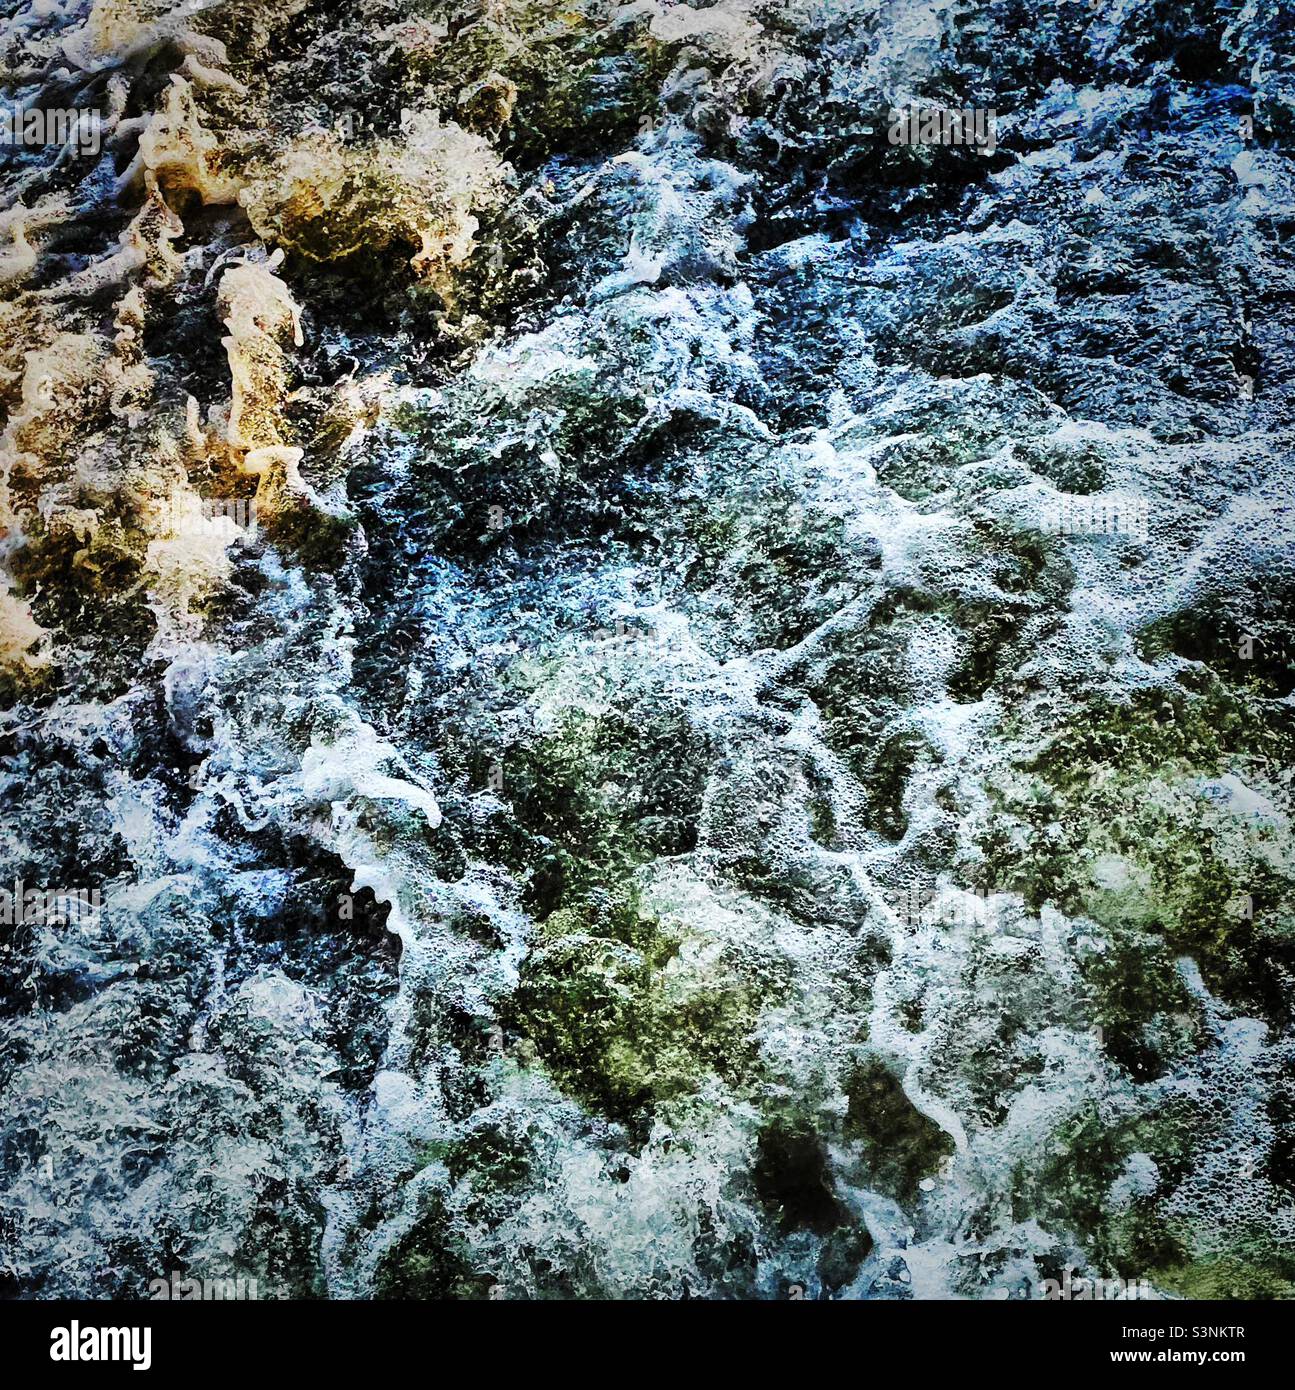 ‘Splash!’ An up close view of the bubbling water as it crashes down from the river above. Sunlight catches it and adds a colourful tint Stock Photo